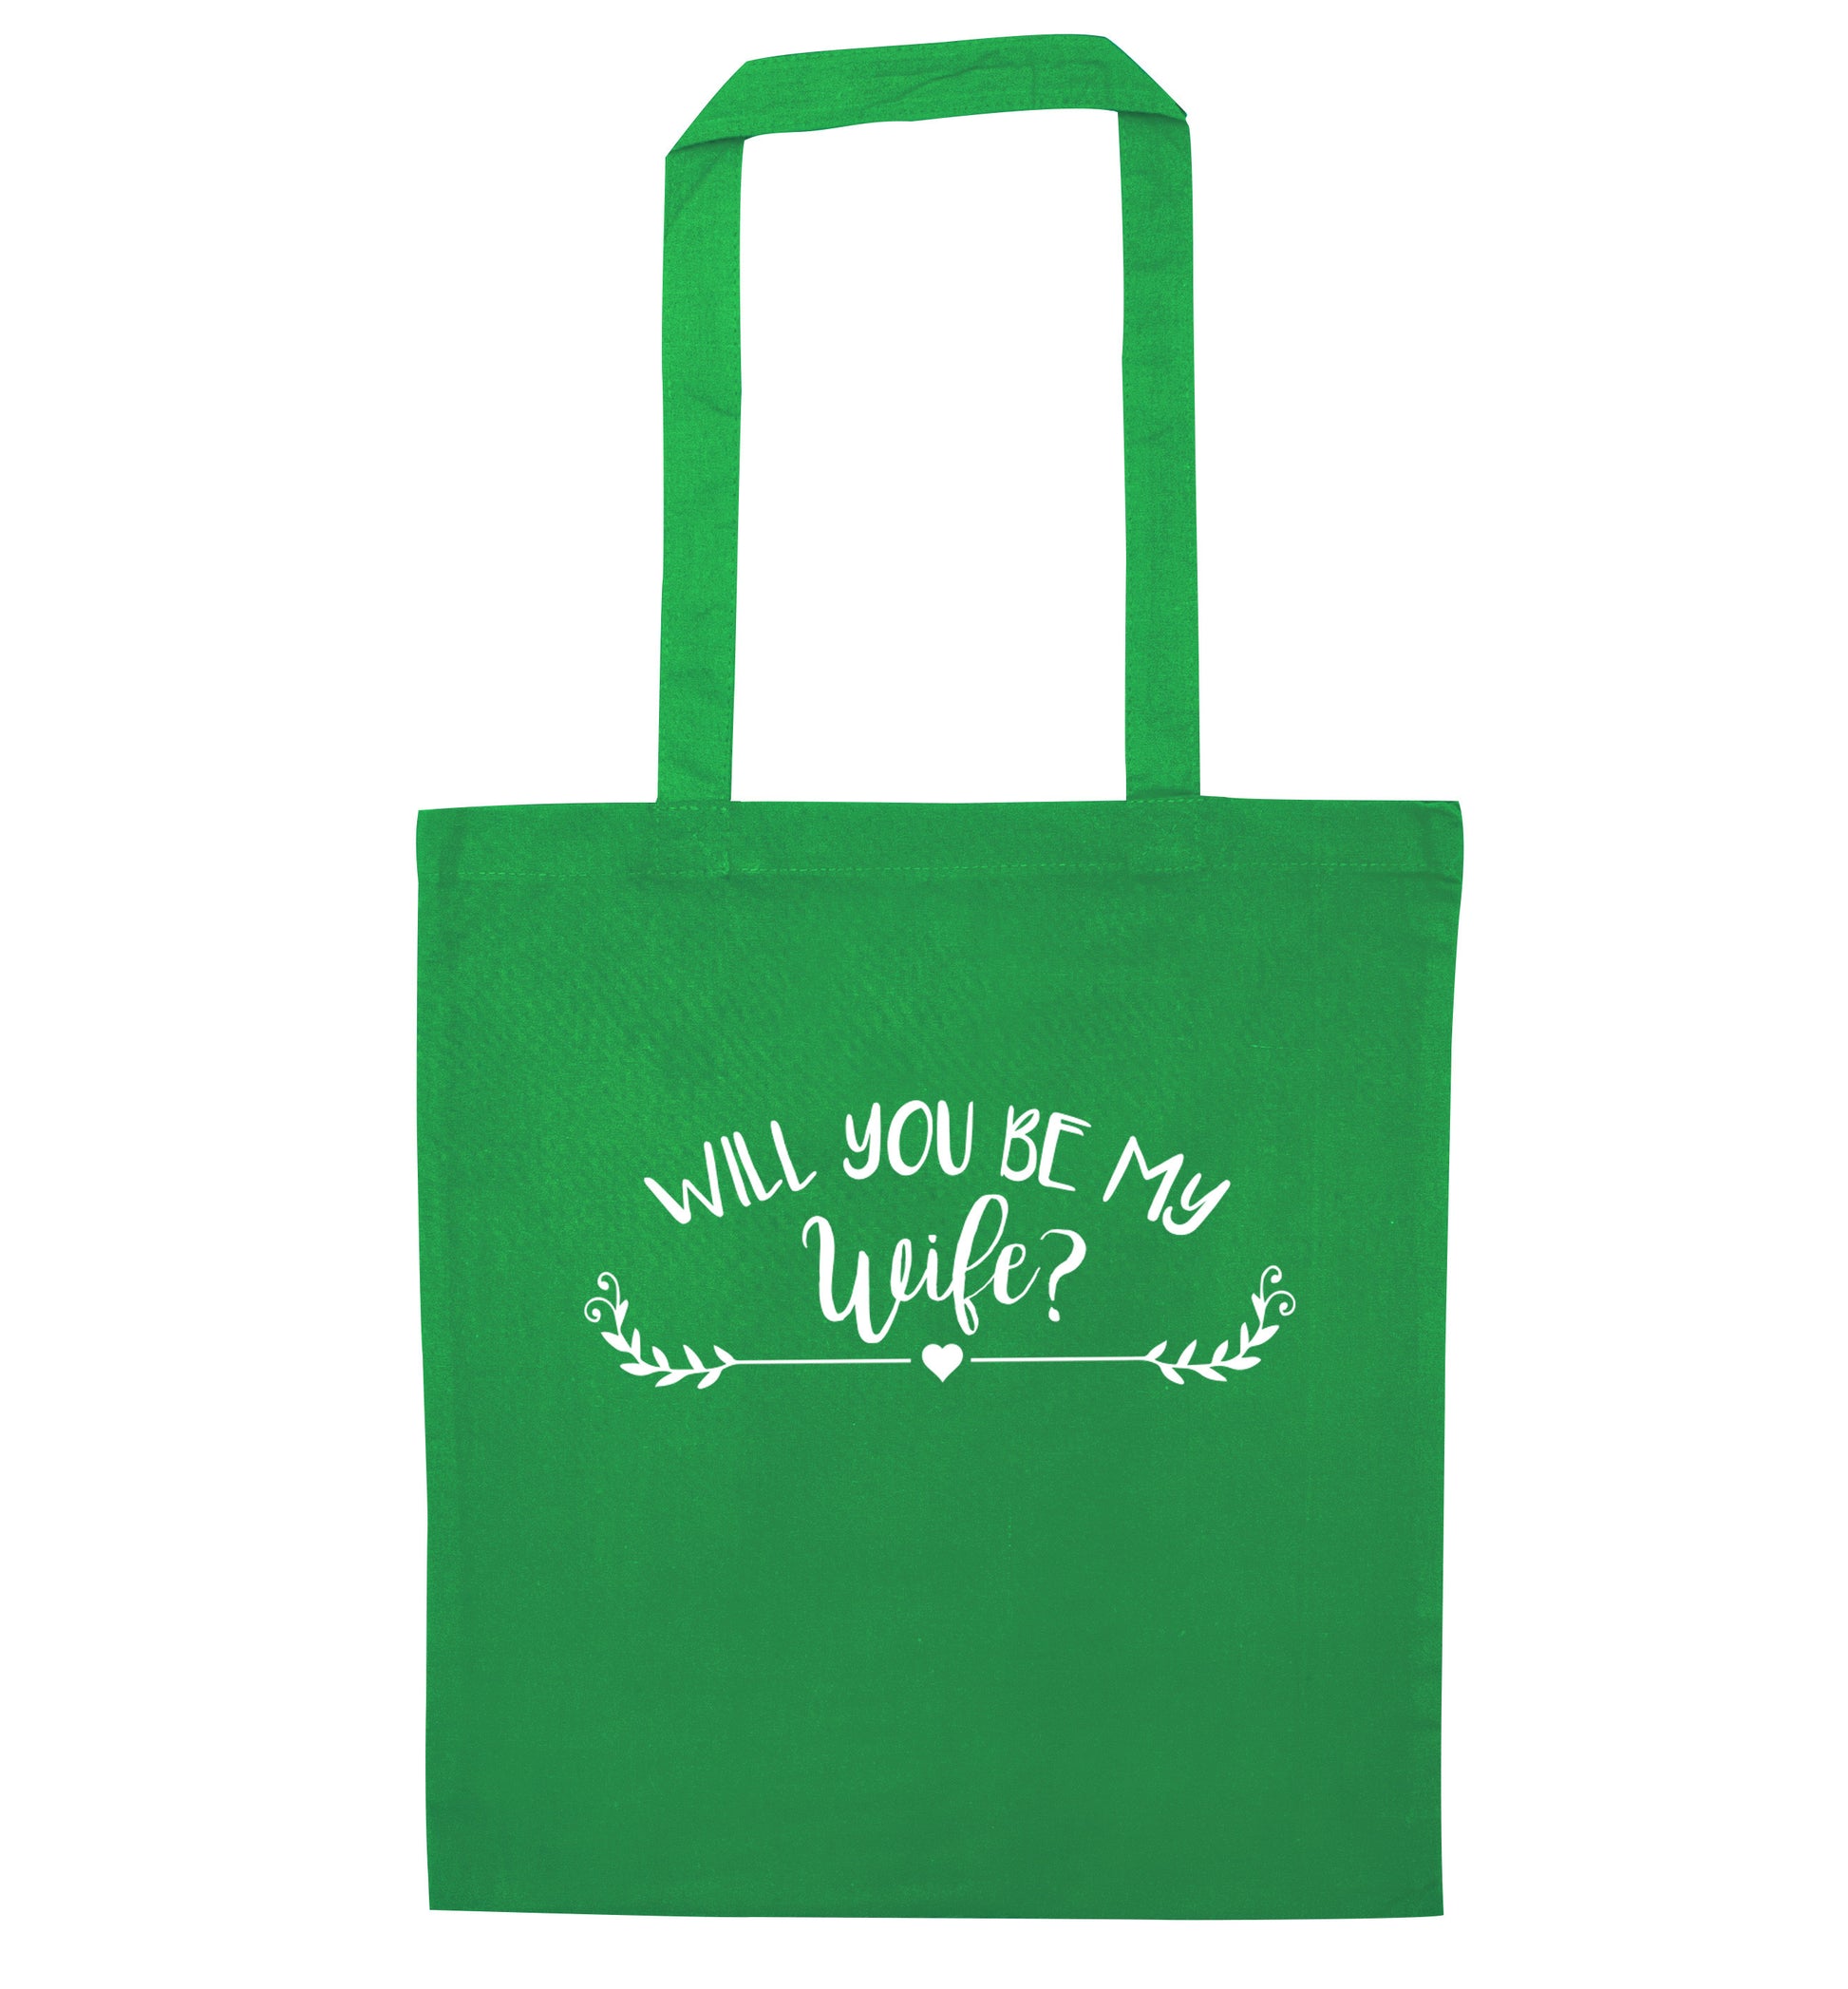 Will you be my wife? green tote bag